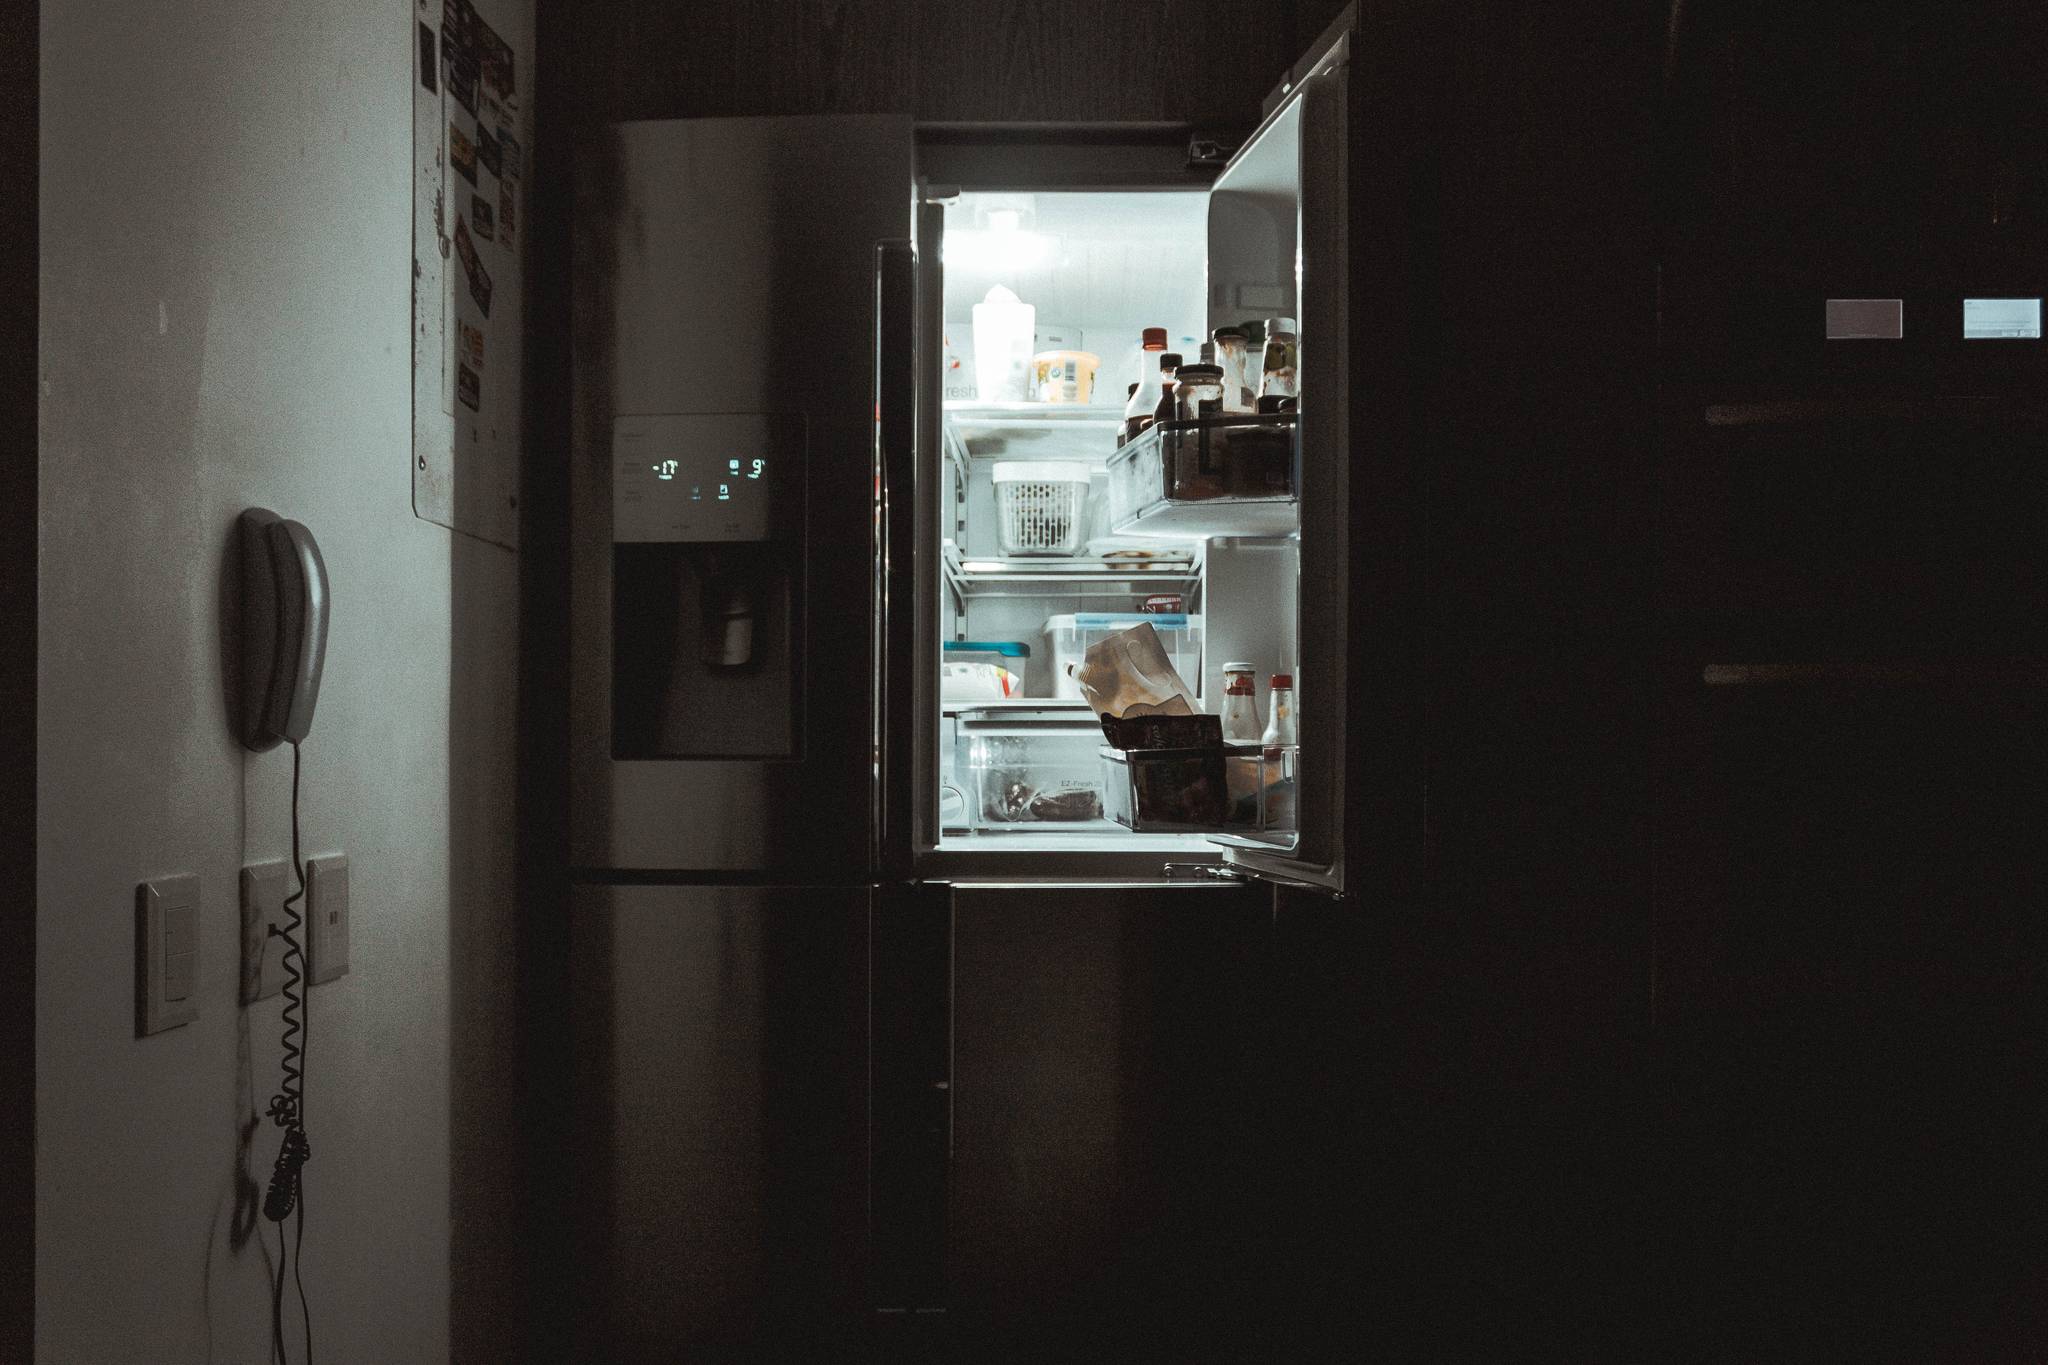 A freezer was stolen from a Lemon Creek apartment early Sunday while the victim was home. (Unsplash | NRD)